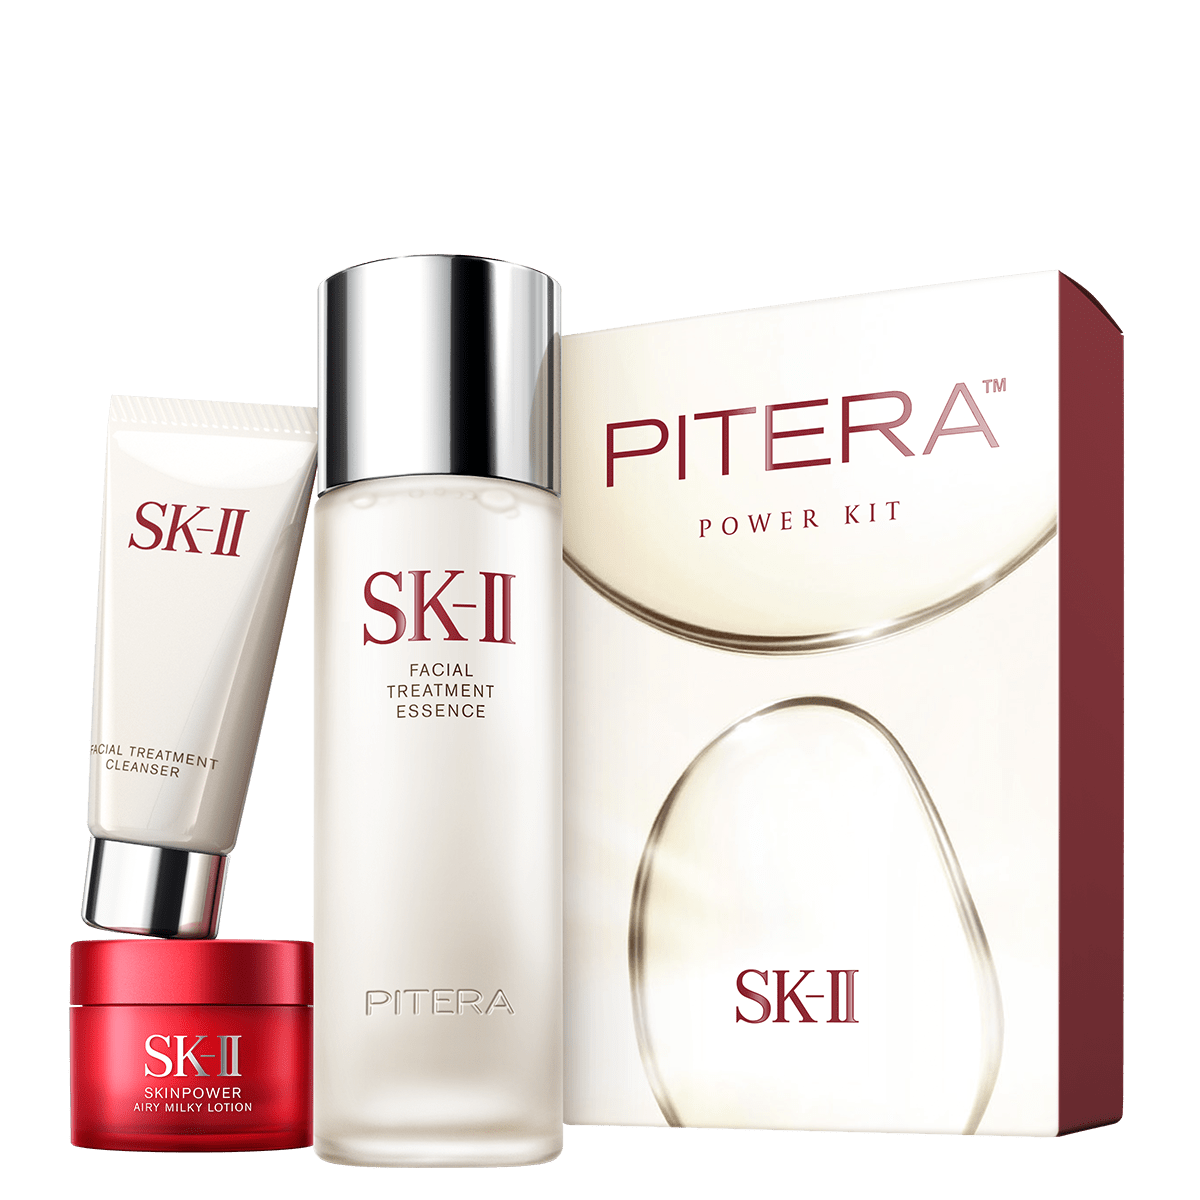 Shop Skincare Products for All Skin Types | SK-II Singapore